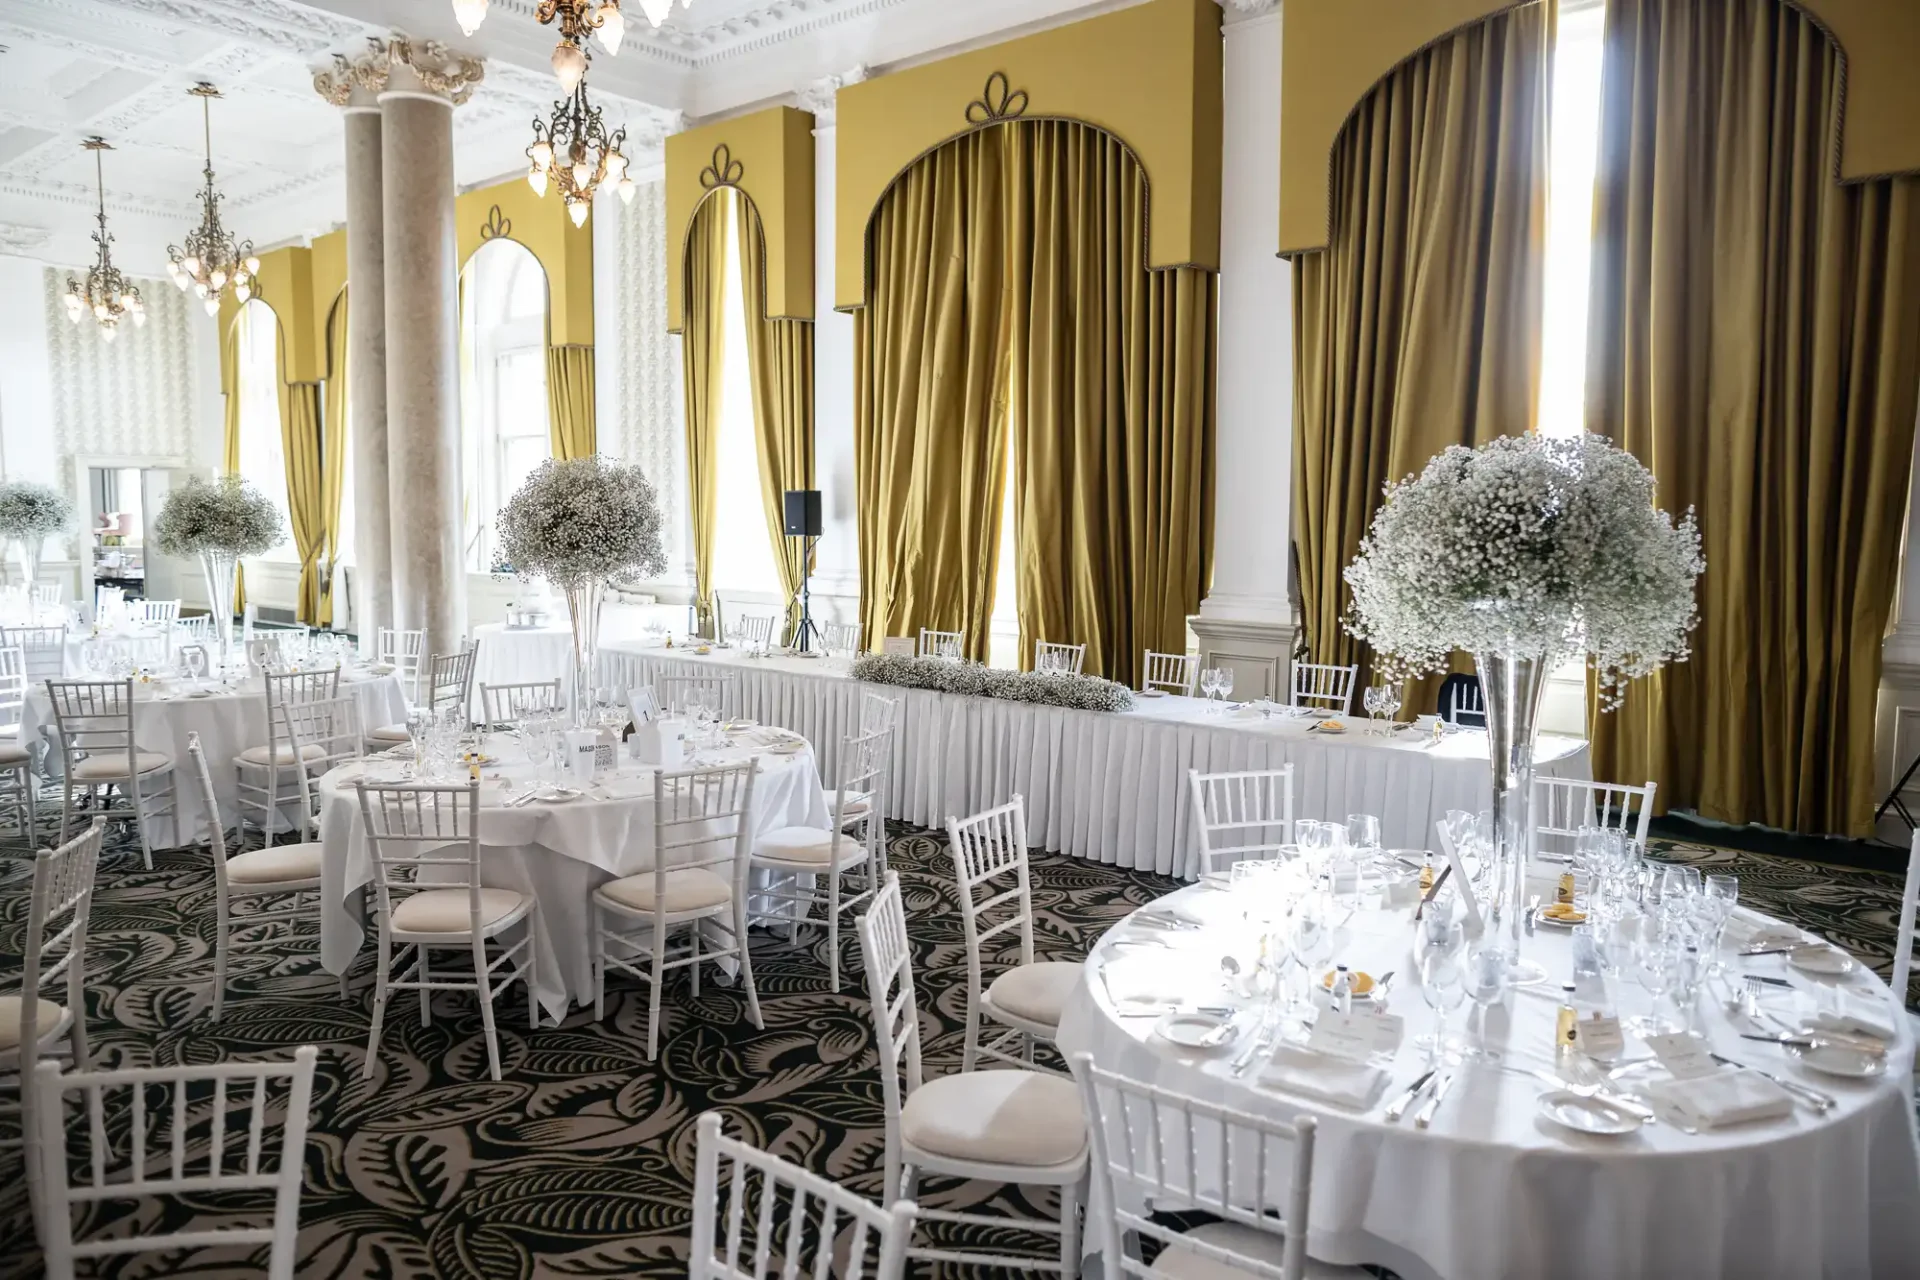 Elegant dining room setup for a wedding, featuring white chairs, round tables with floral centerpieces, and draped golden curtains.